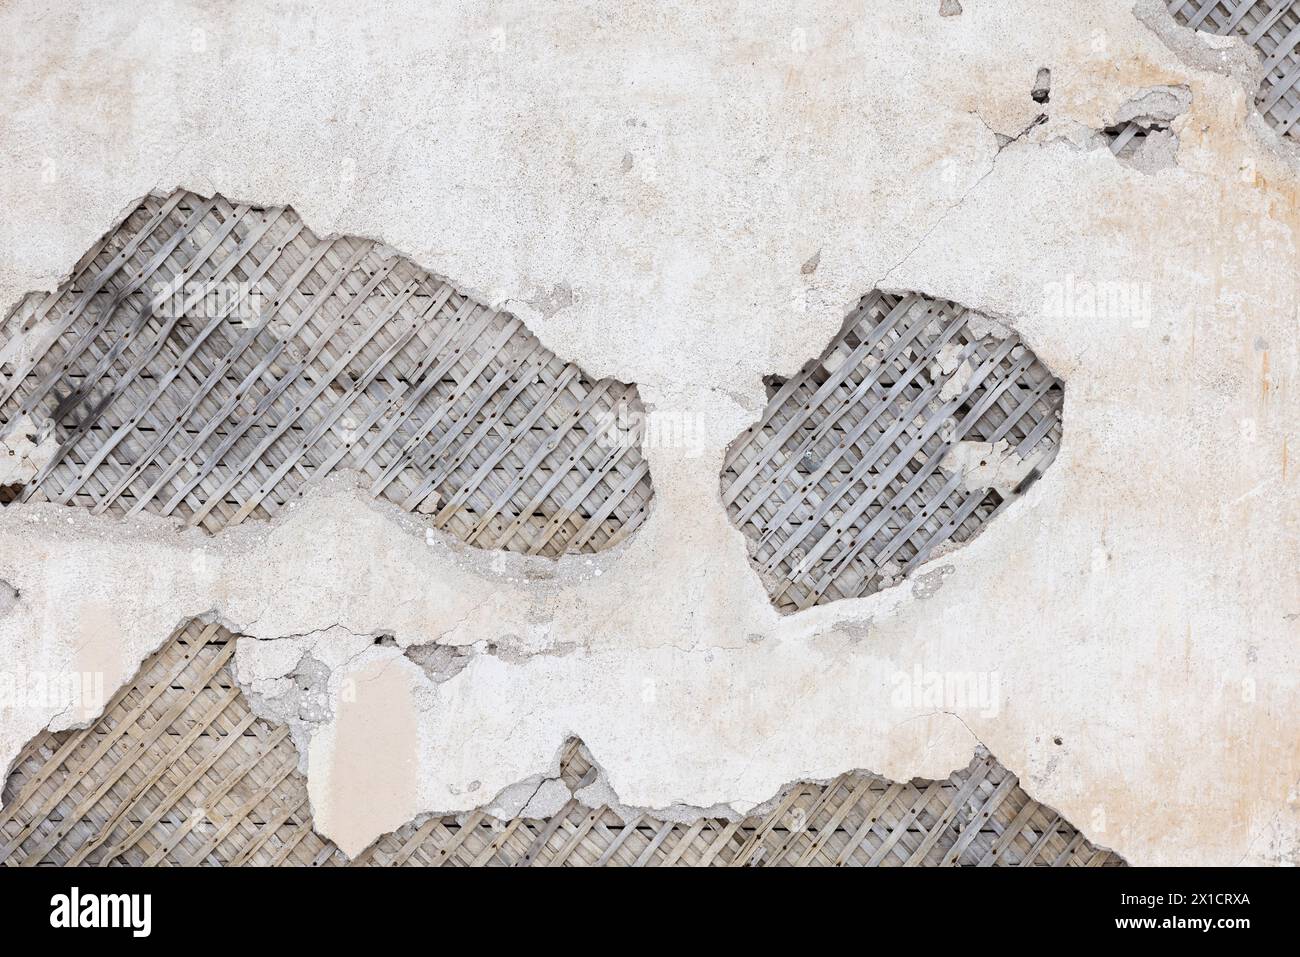 Ancient wooden wall with damaged stucco layer placed over wooden lathing for plaster Stock Photo